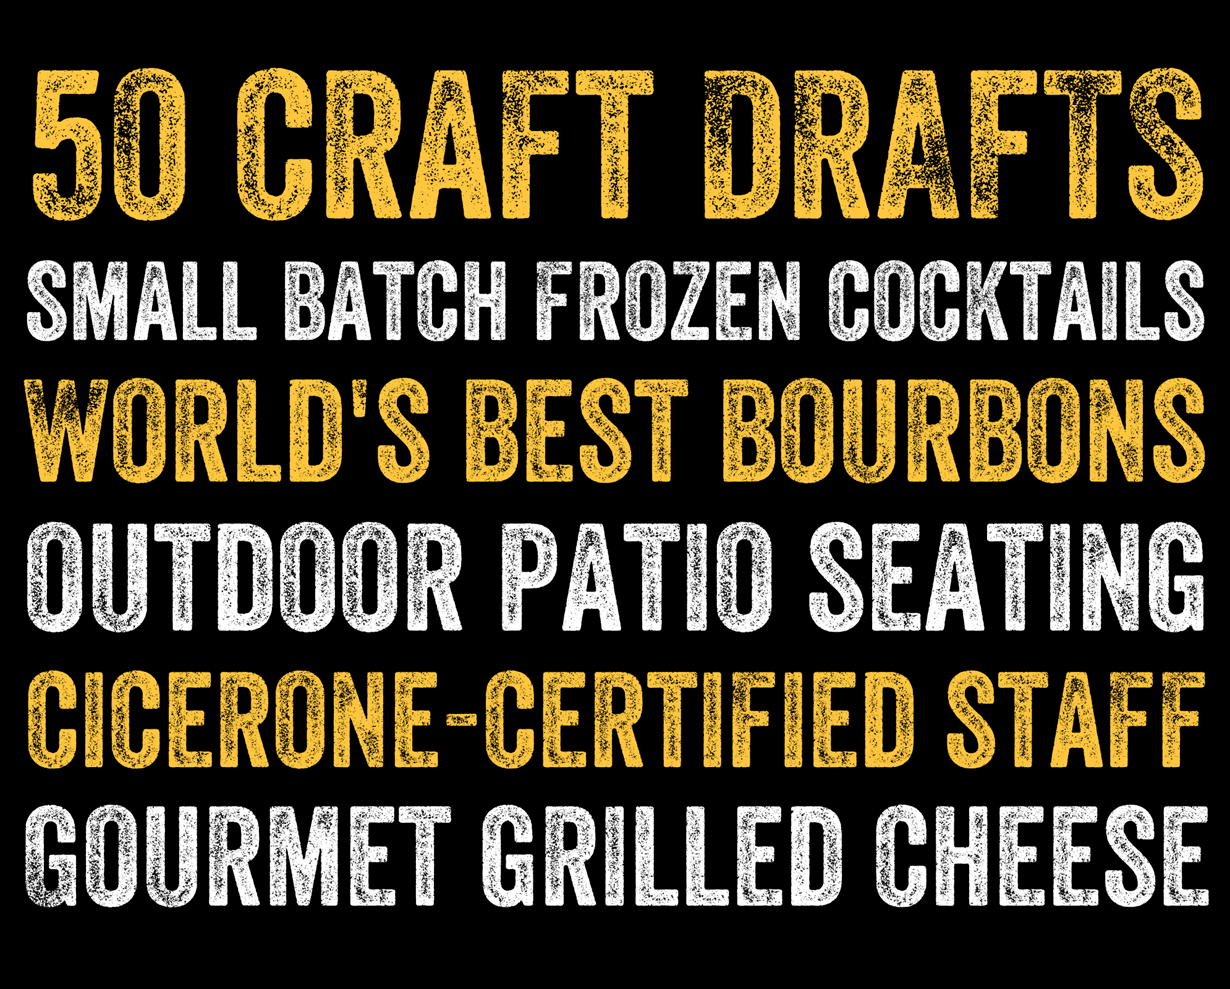 50 craft drafts small batch frozen cocktails best bourbons outdoor patio seating cicerone certified gourmet grilled cheese